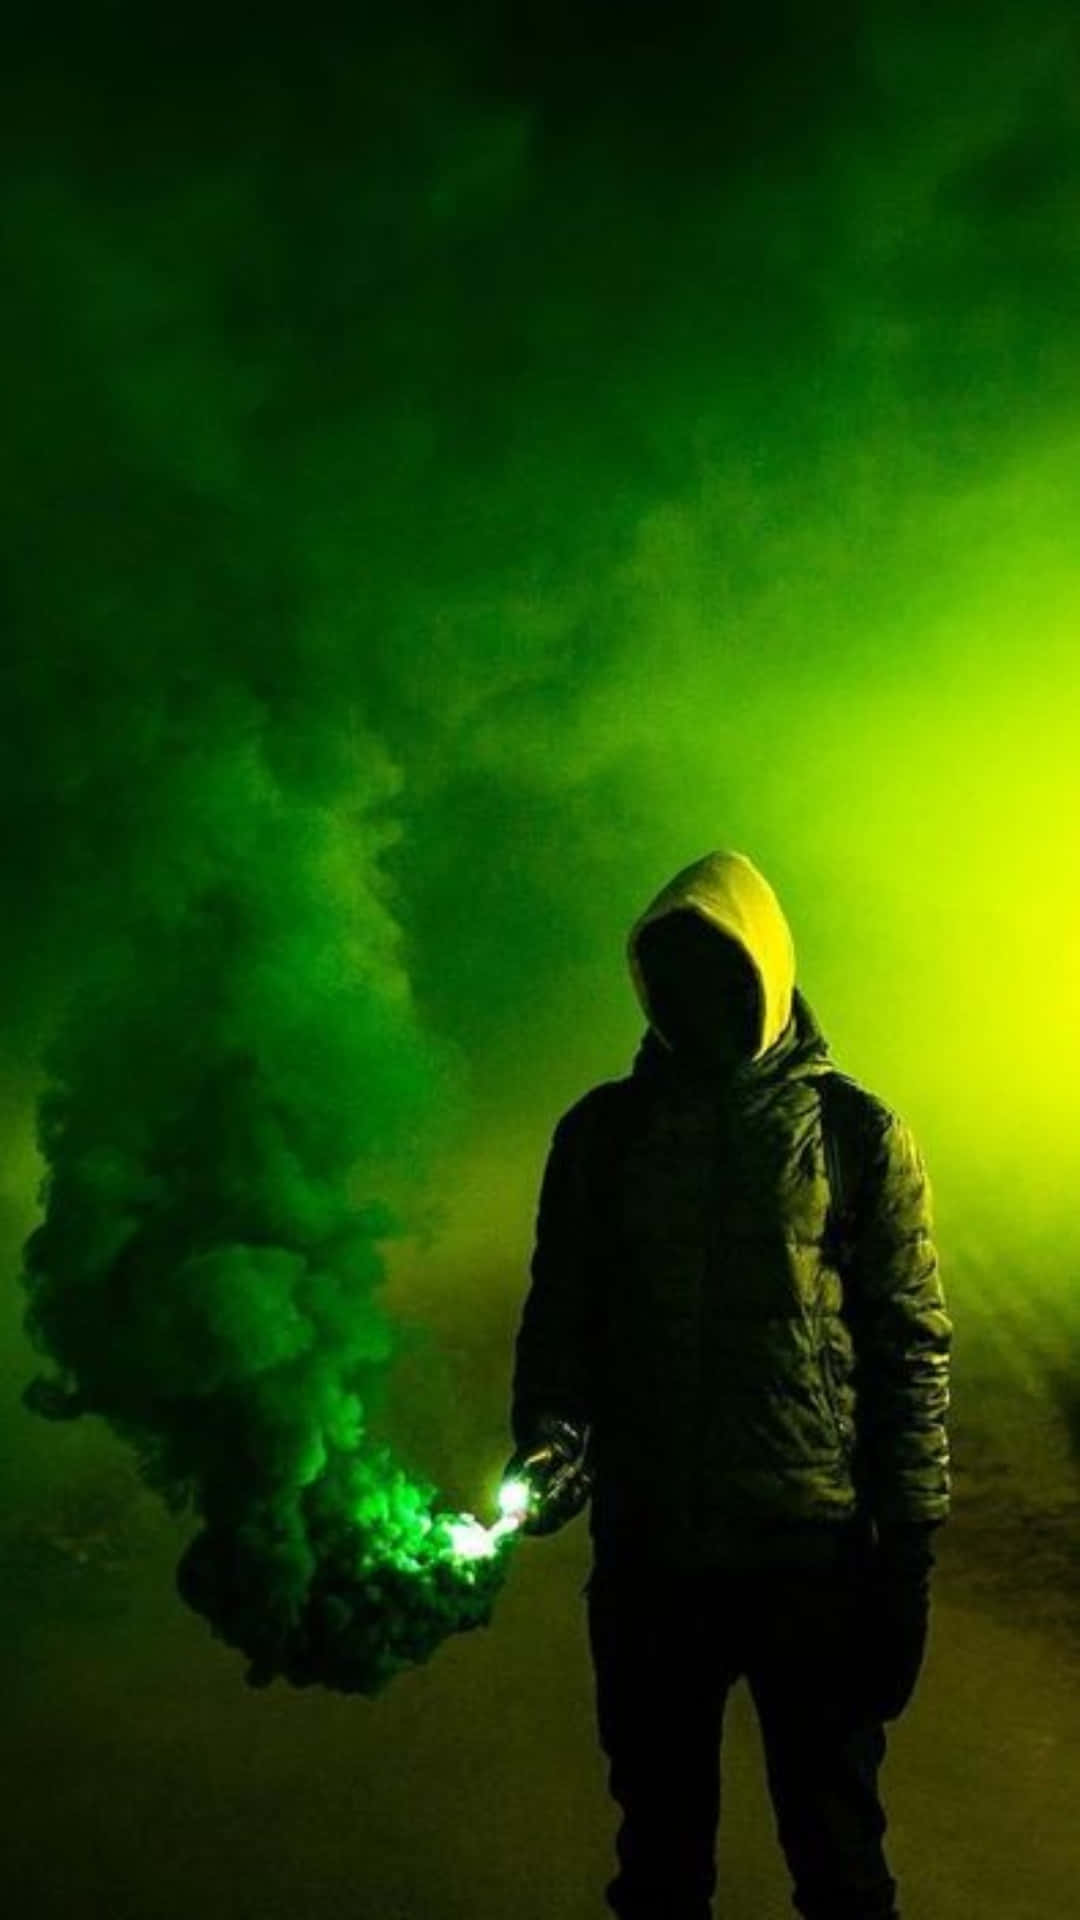 Man Silhouetted Against Green Smoke Explosion Wallpaper